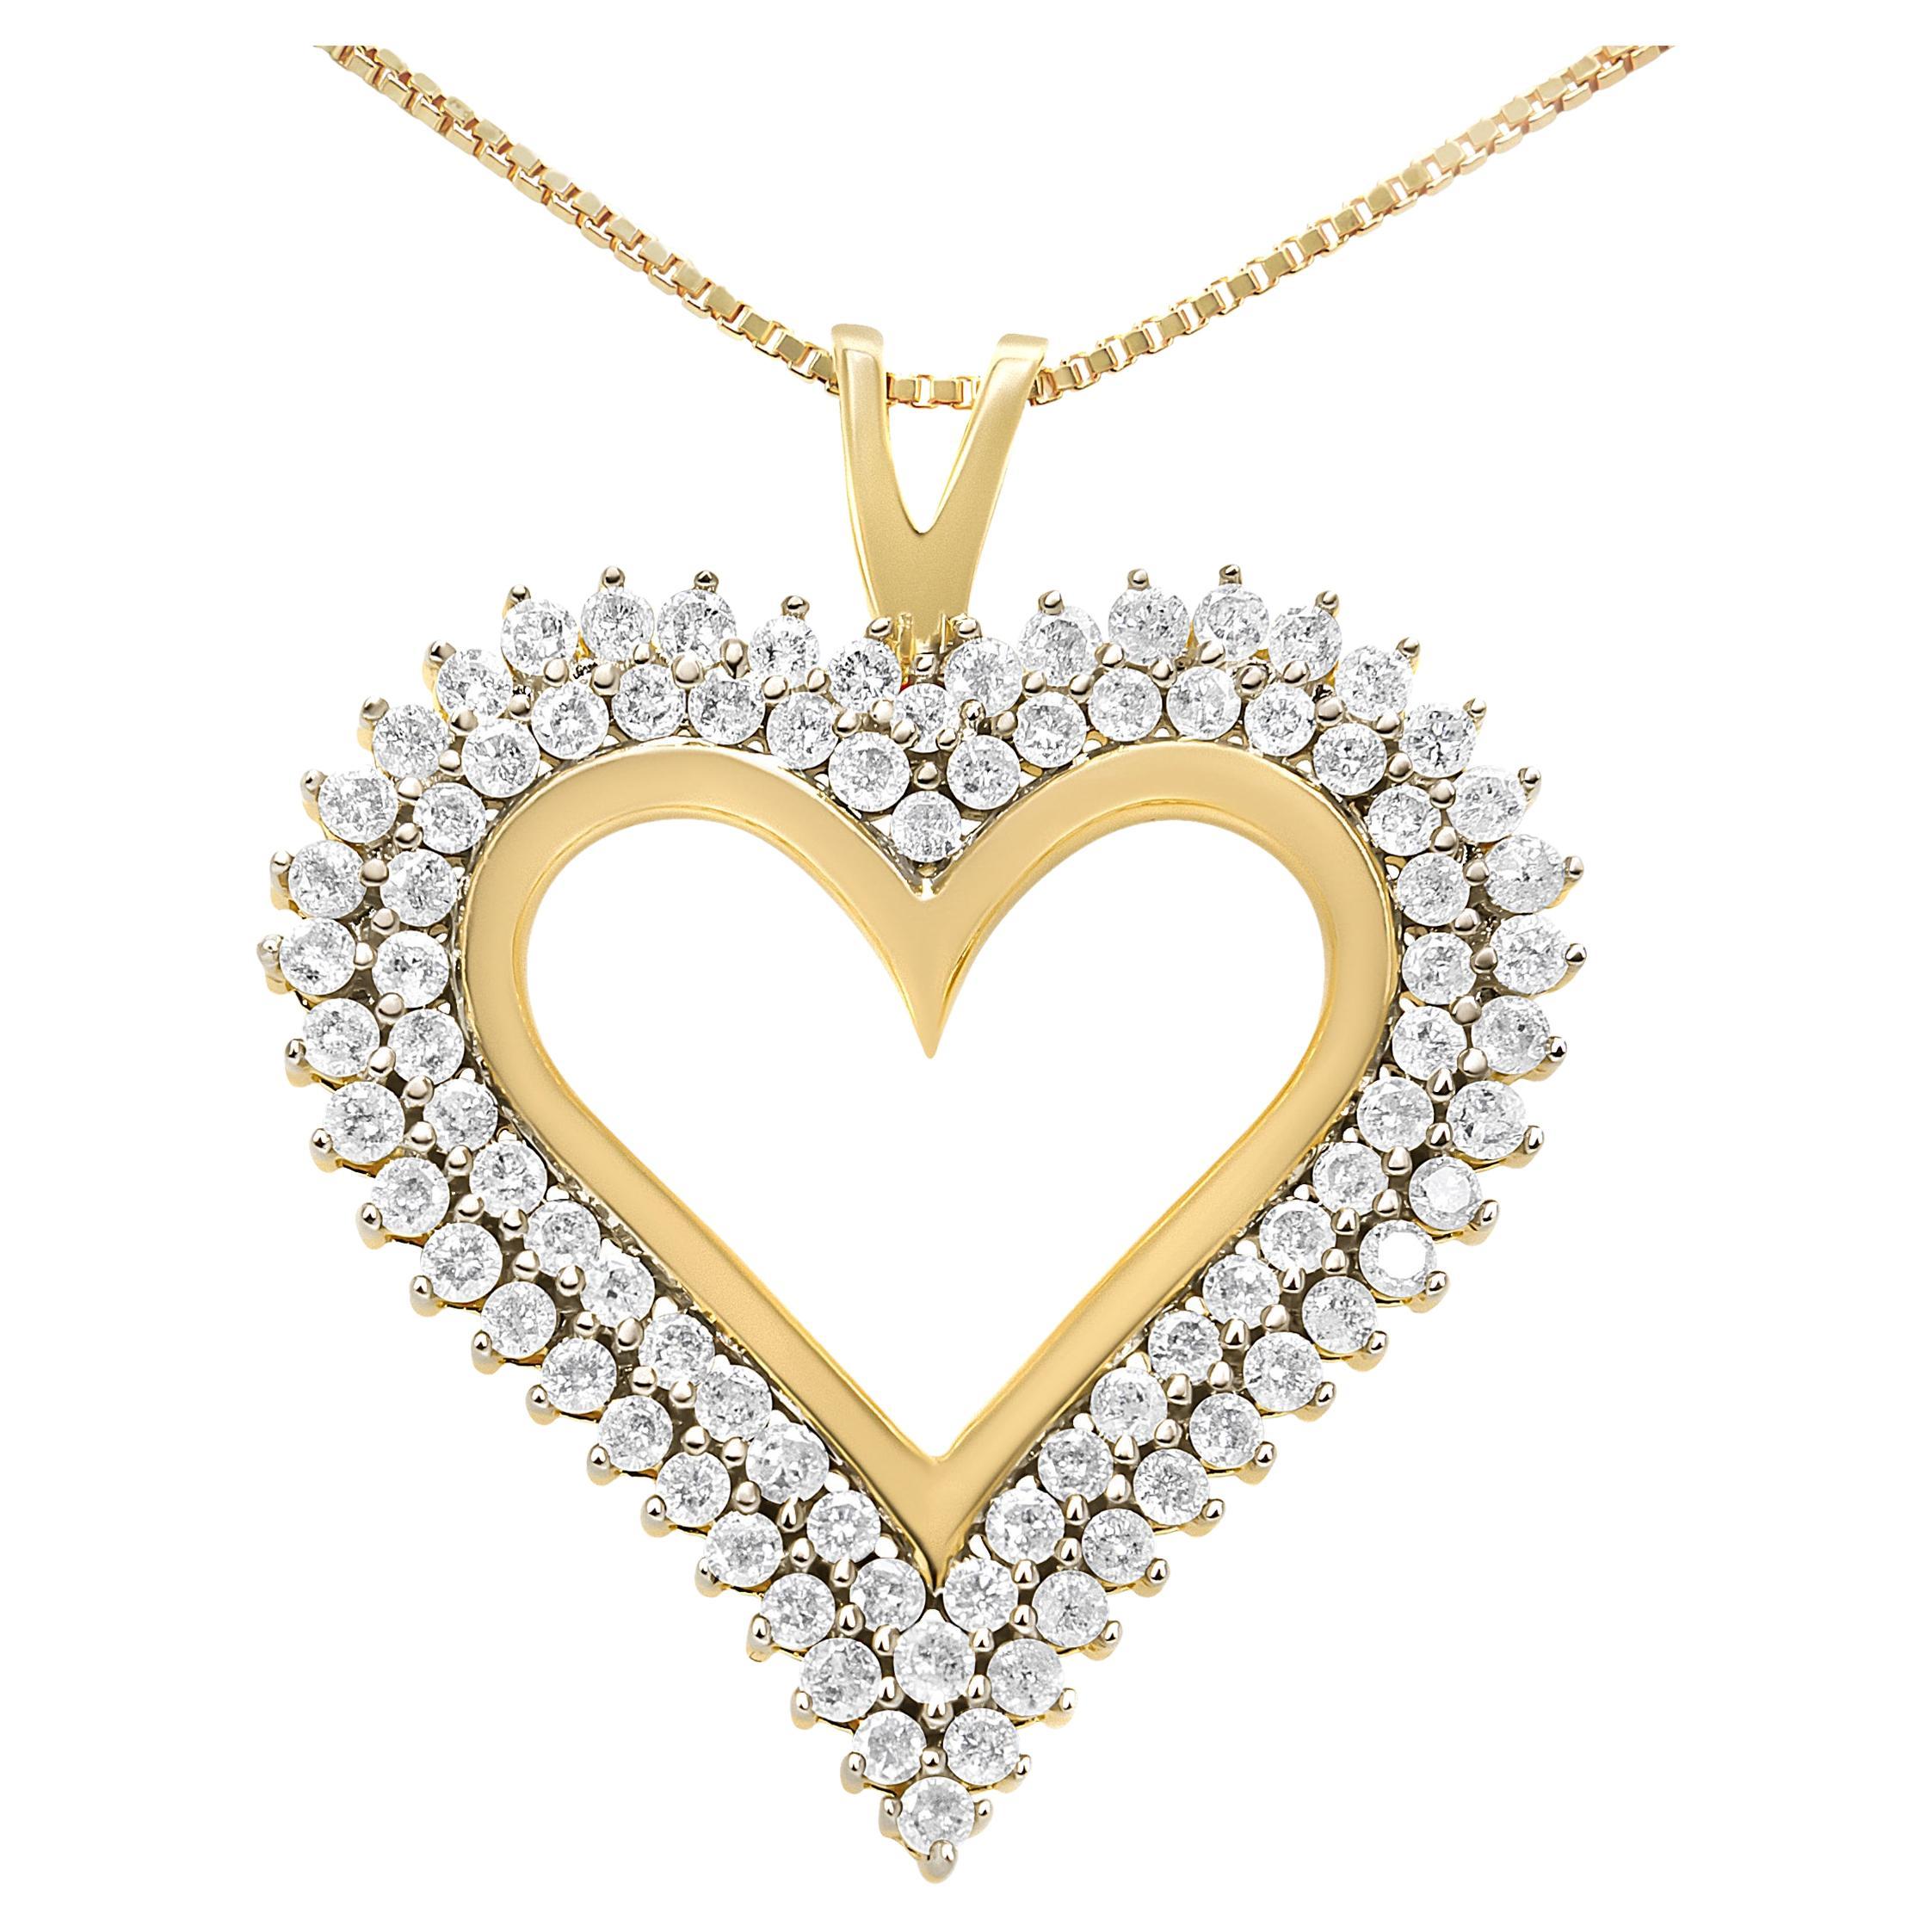 10K Yellow Gold Plated Sterling Silver 2.0 Carat Diamond Heart Pendant Necklace For Sale